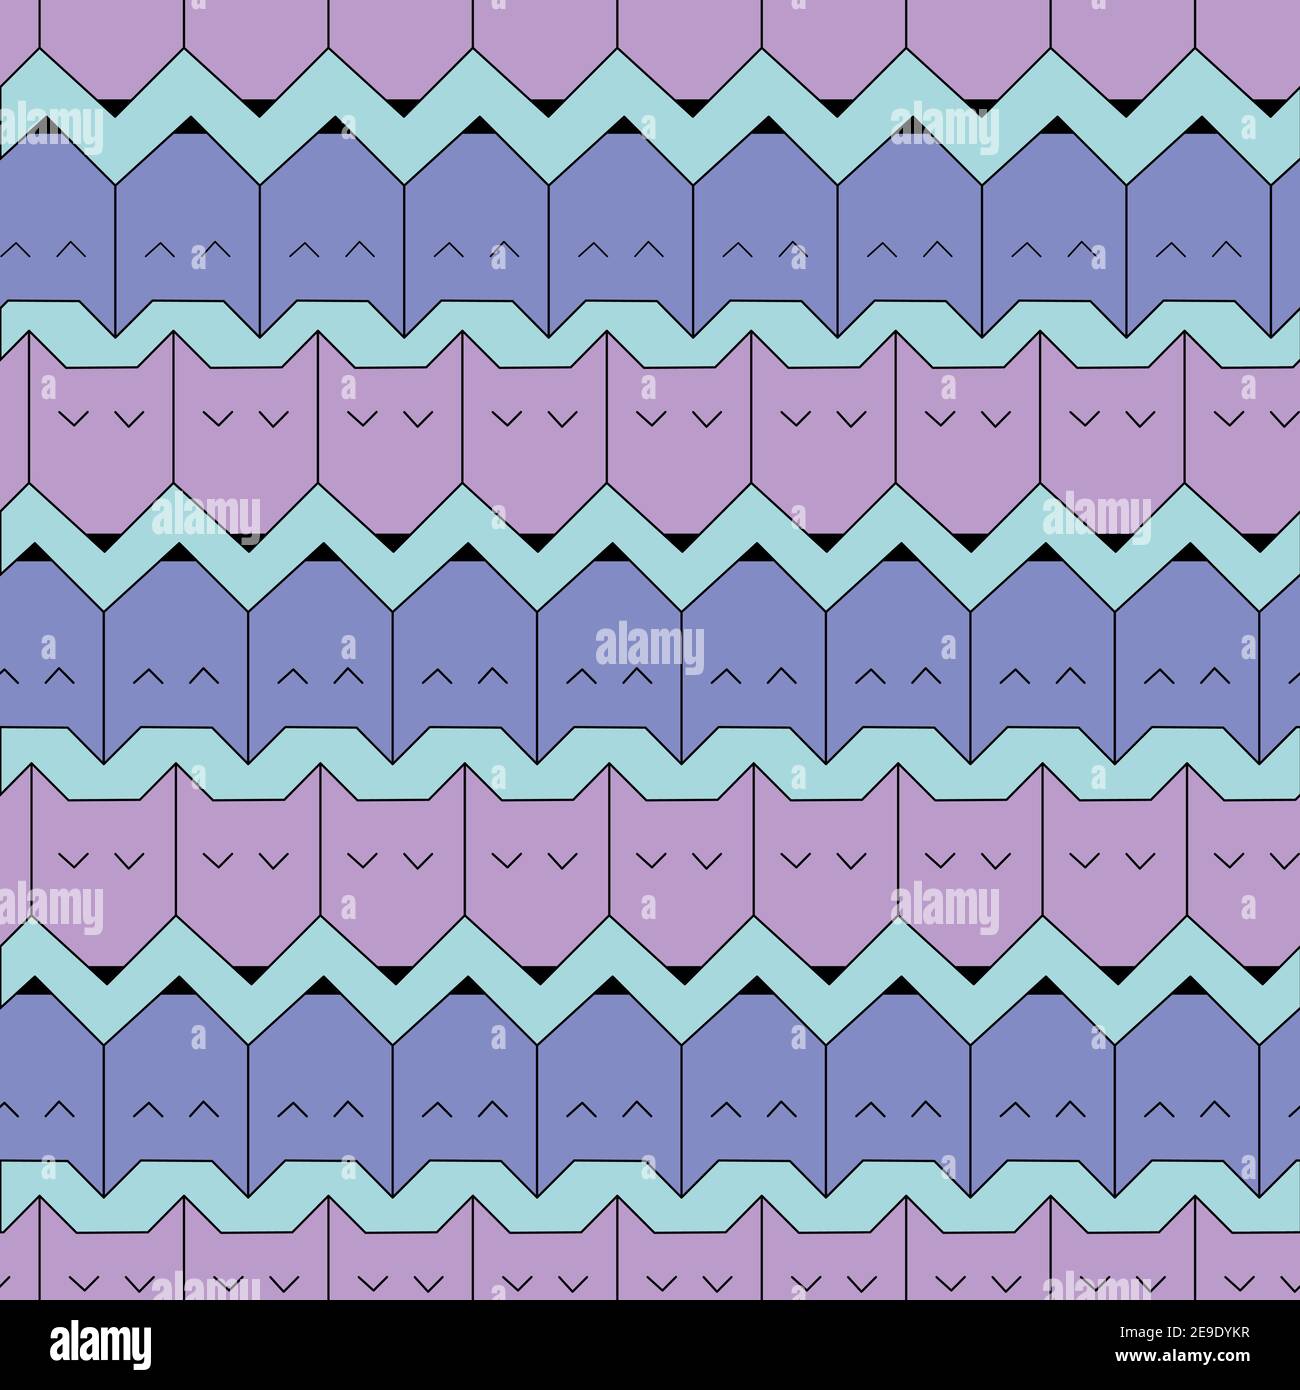 Vector seamless pattern of simple geometrical fox faces lined in the row.  Kids pattern, textile, nice baby decor. Stock Vector